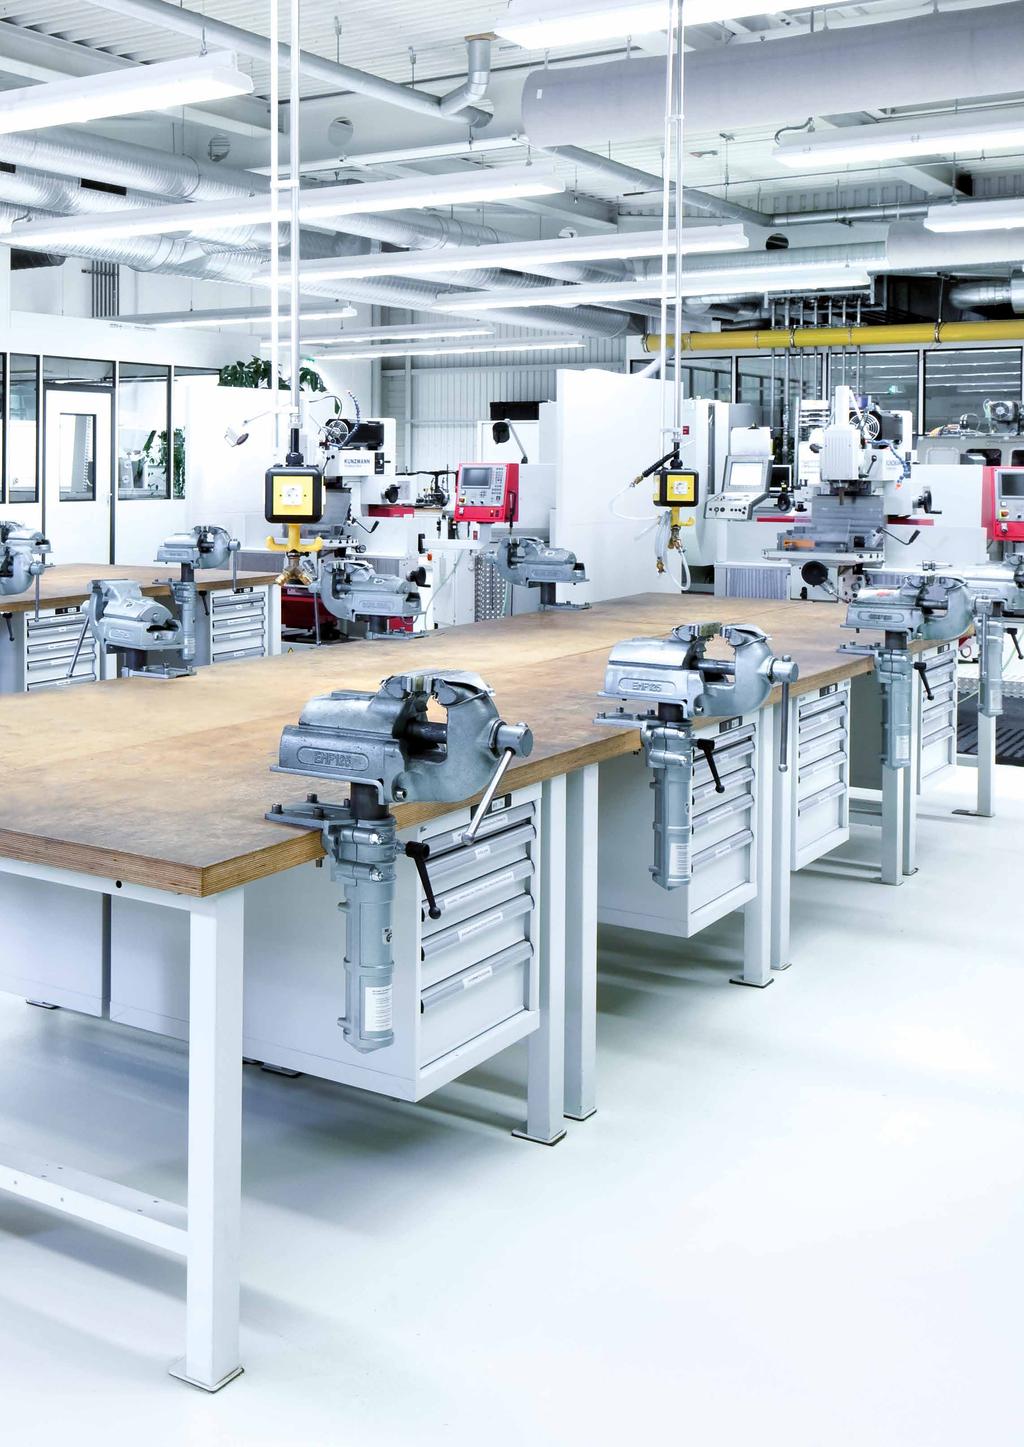 Utmost stability workbench load capacity up to 3 t, workbench top extremely robust and resistant Great design diversity thanks to the wide range of components, substructures, materials and surfaces